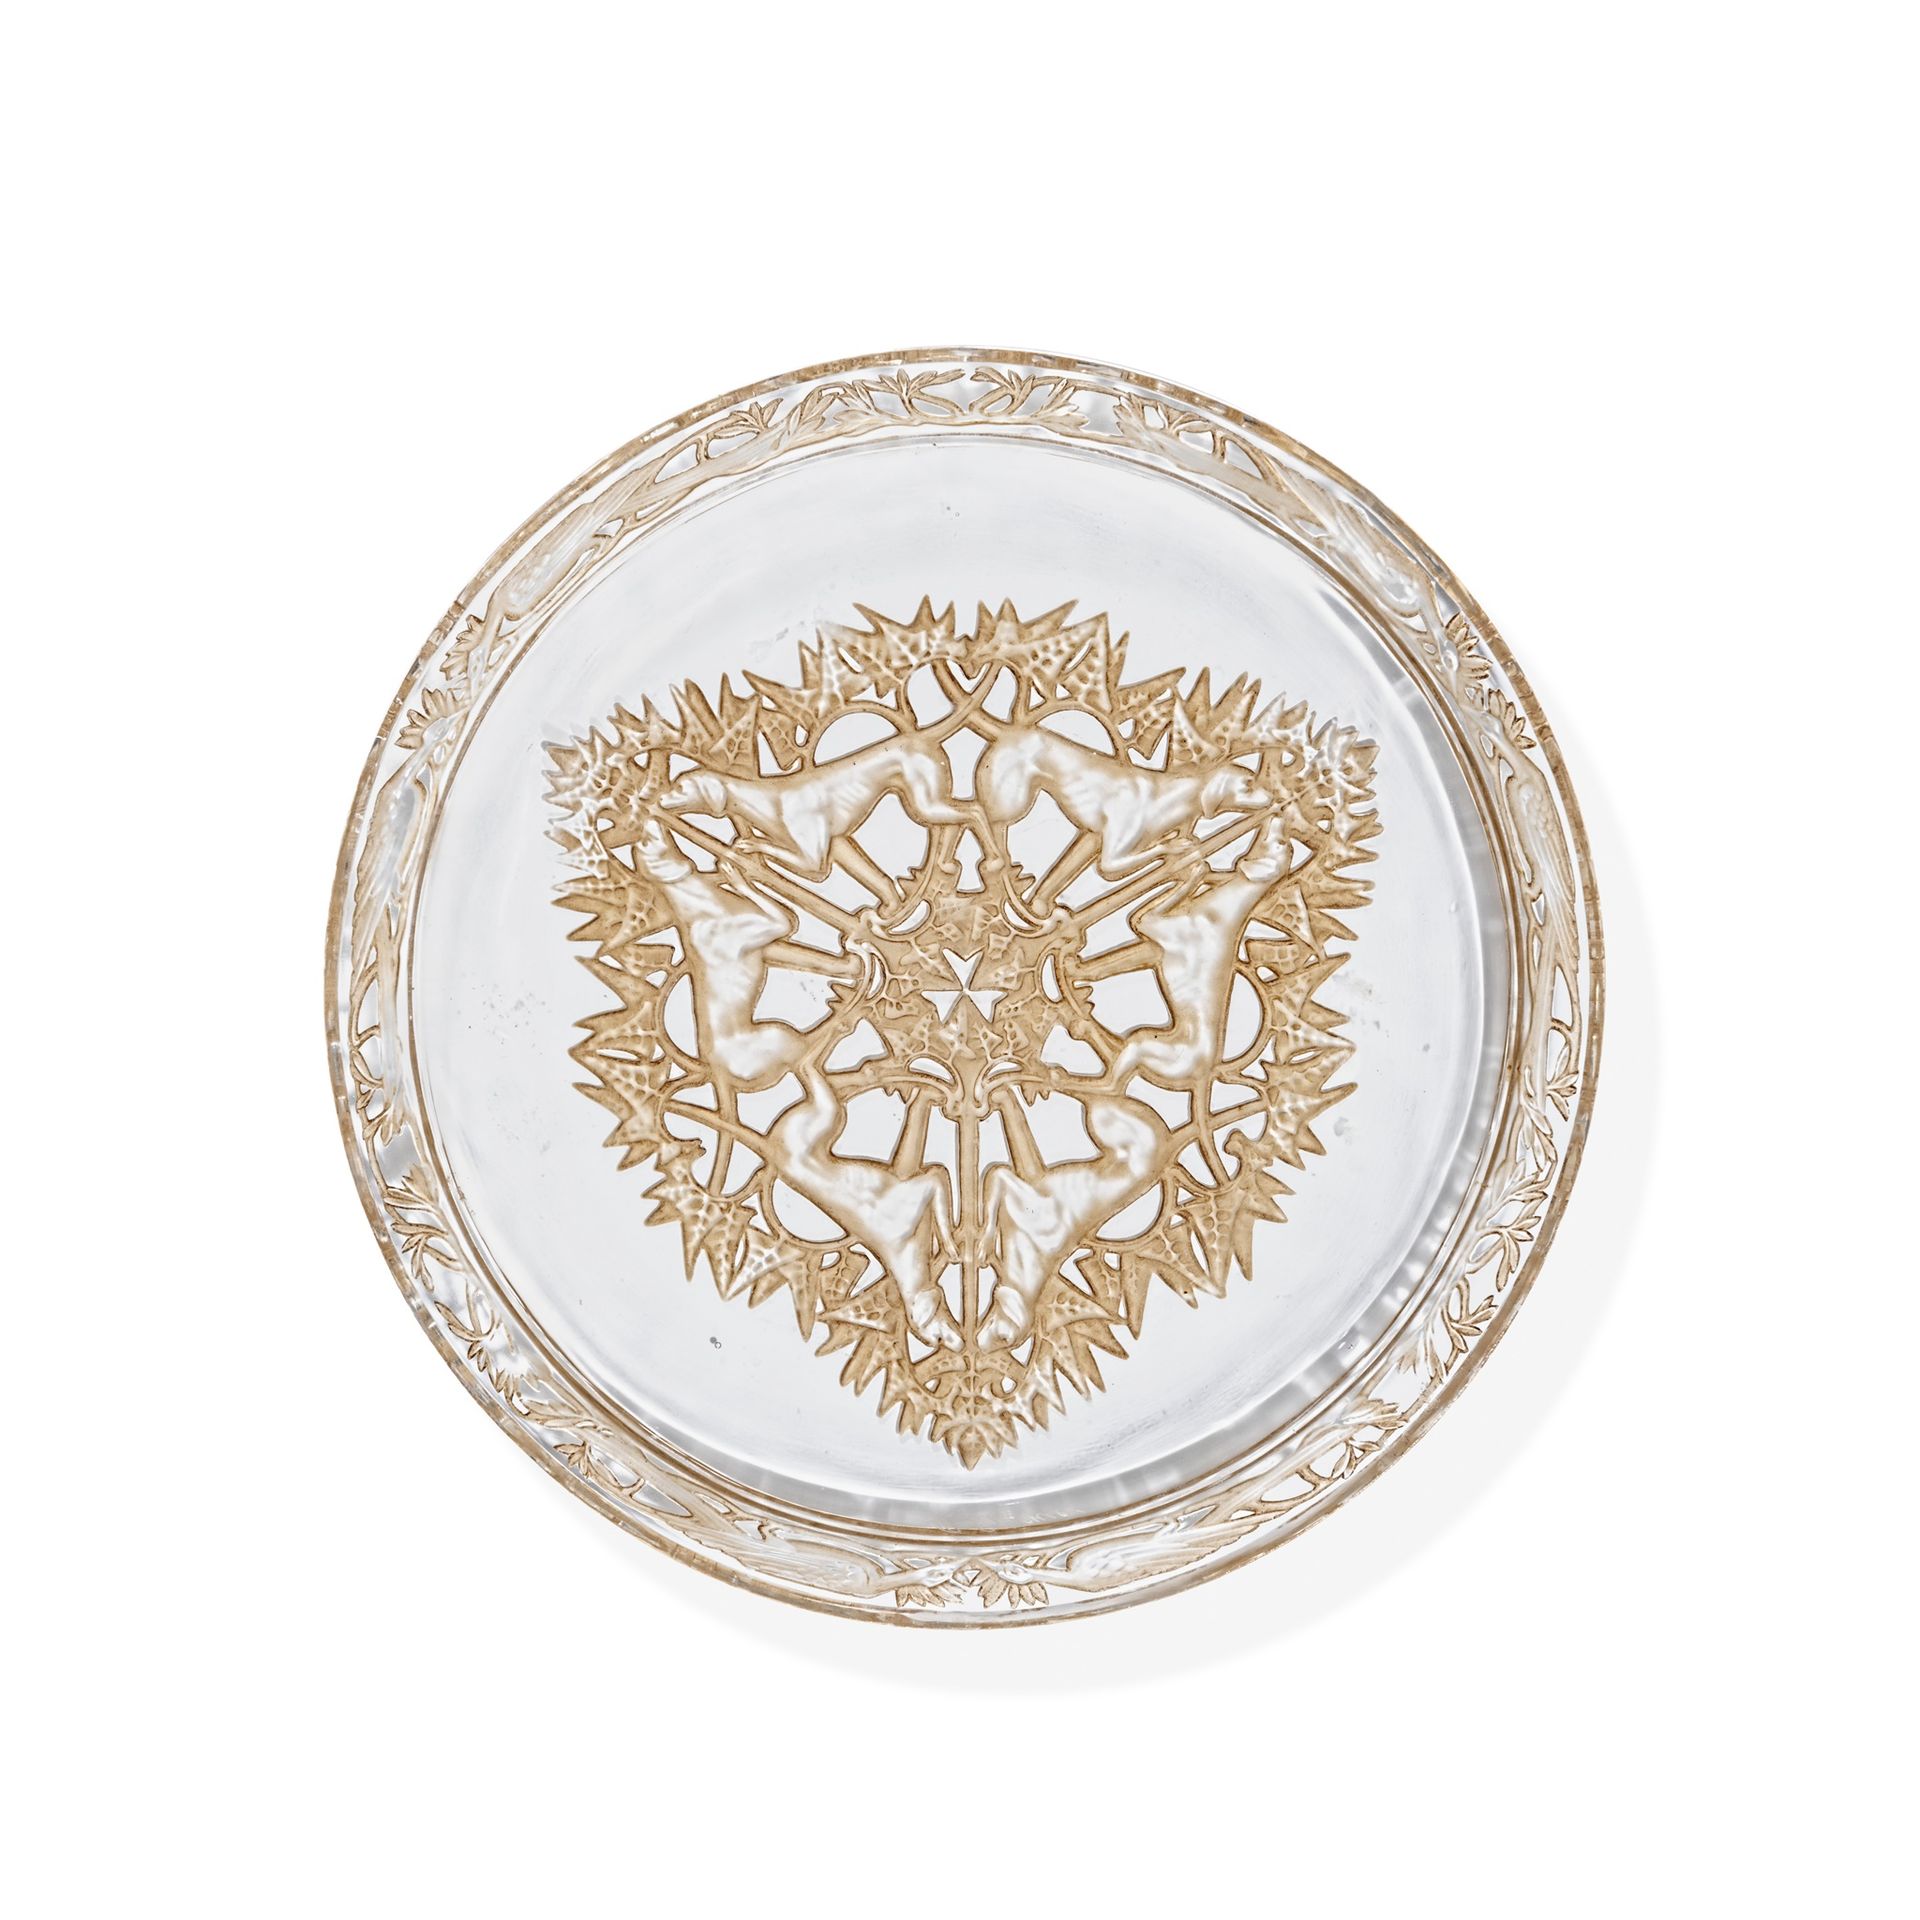 René Lalique (French 1860-1945) CHASSE CHIEN PLATE NO. 3001 设计 1914年 透明，磨砂和深褐色染色&hellip;